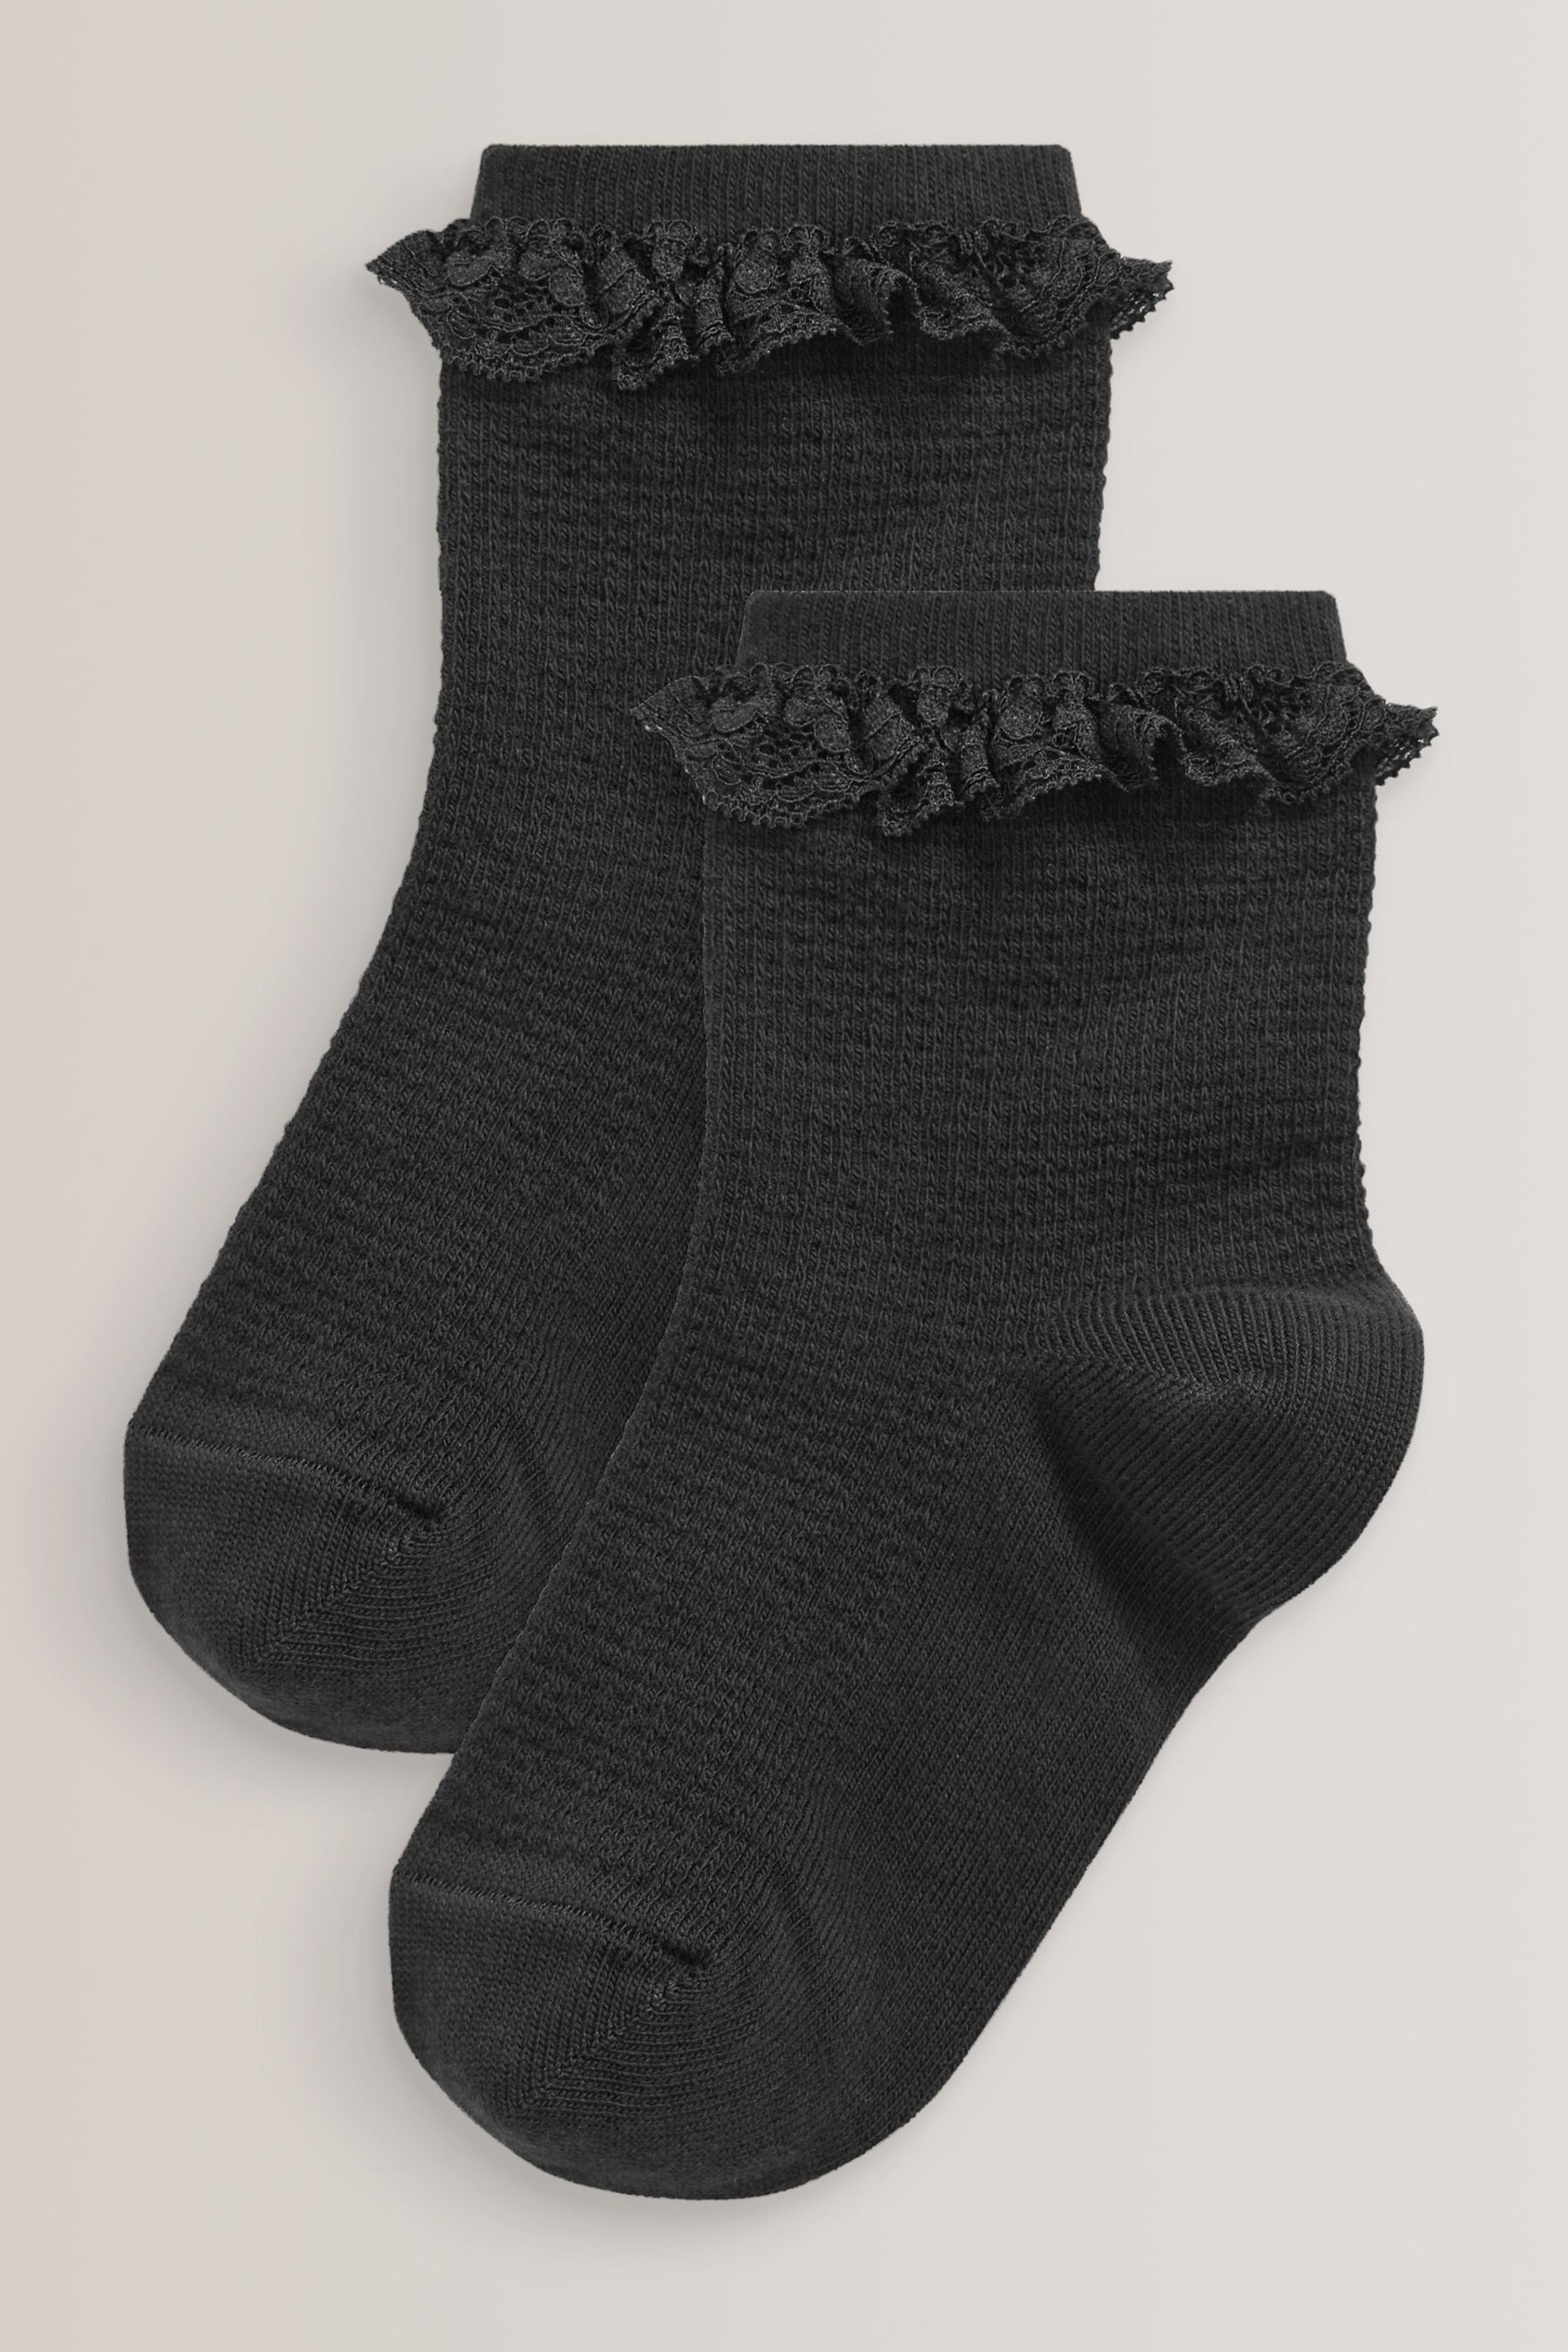 Black 2 Pack Cotton Rich Ruffle Ankle Socks - Image 1 of 2